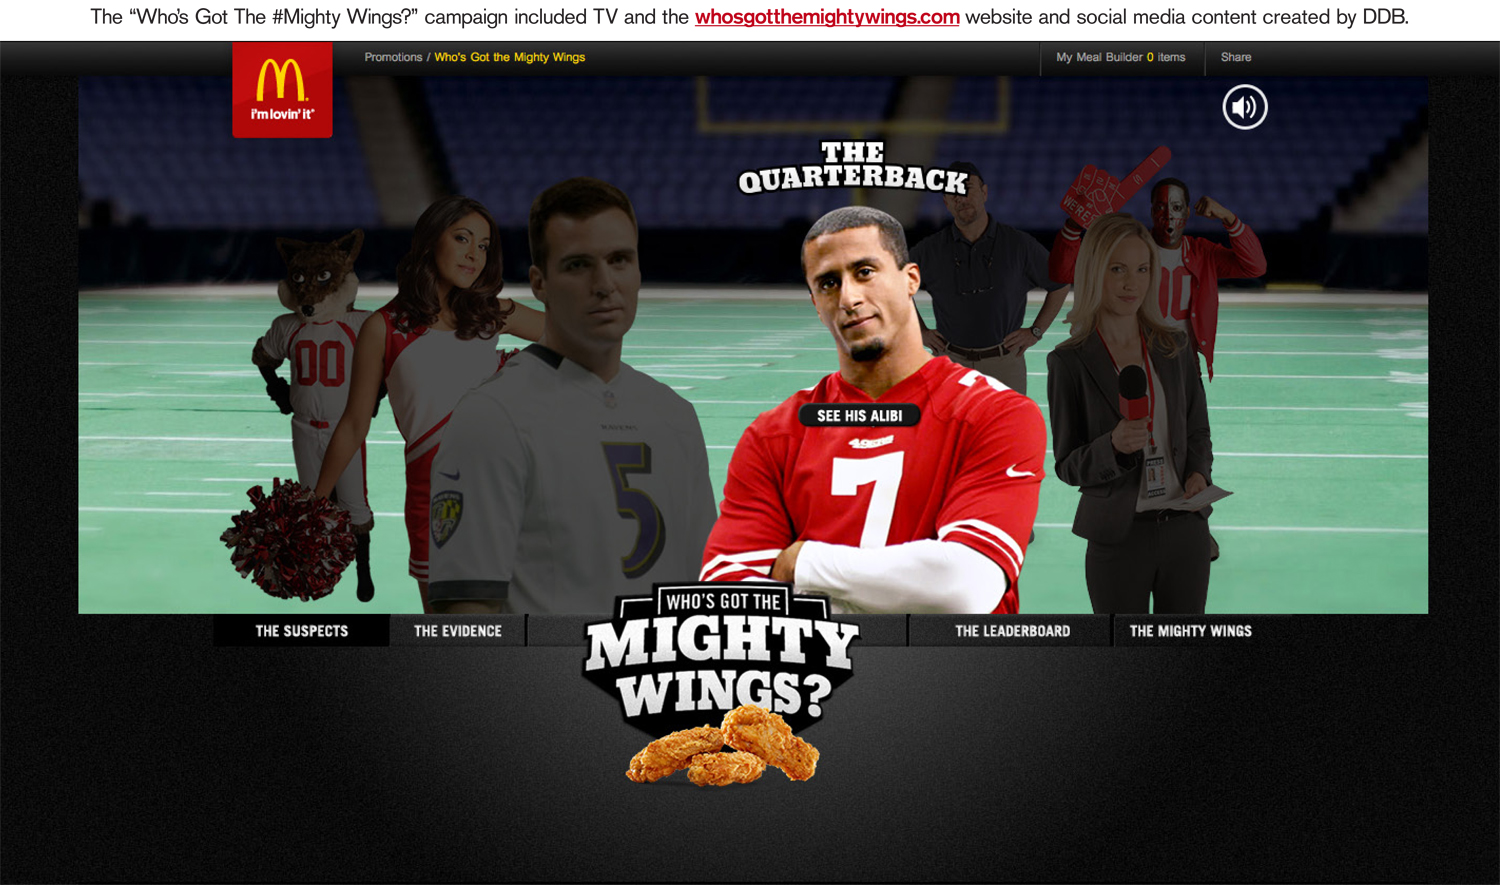  "who's got the mighty wings?" website 